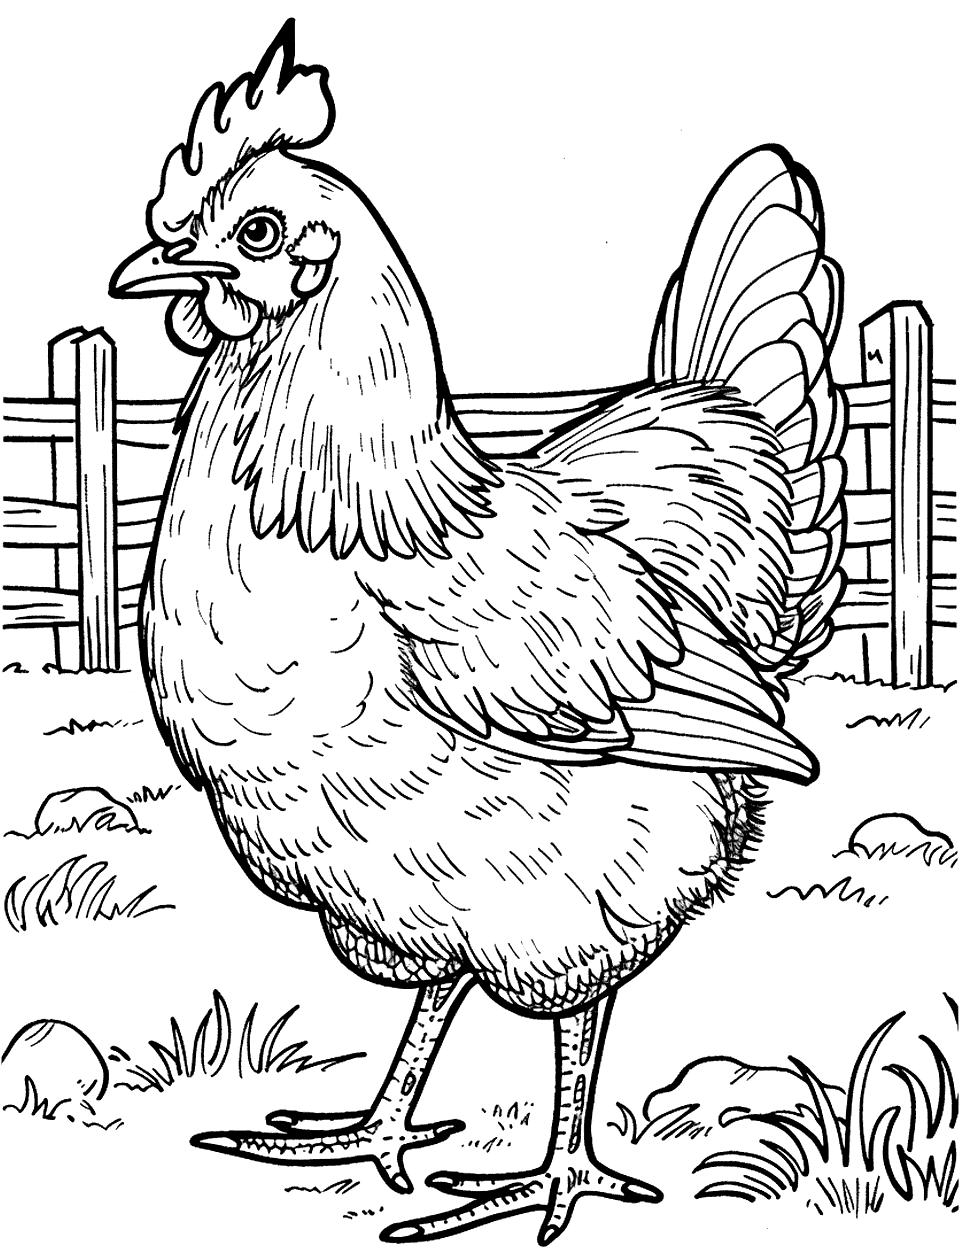 Chicken Exploring the Farm Coloring Page - A curious chicken exploring farm surroundings, with a simple fence in the background.